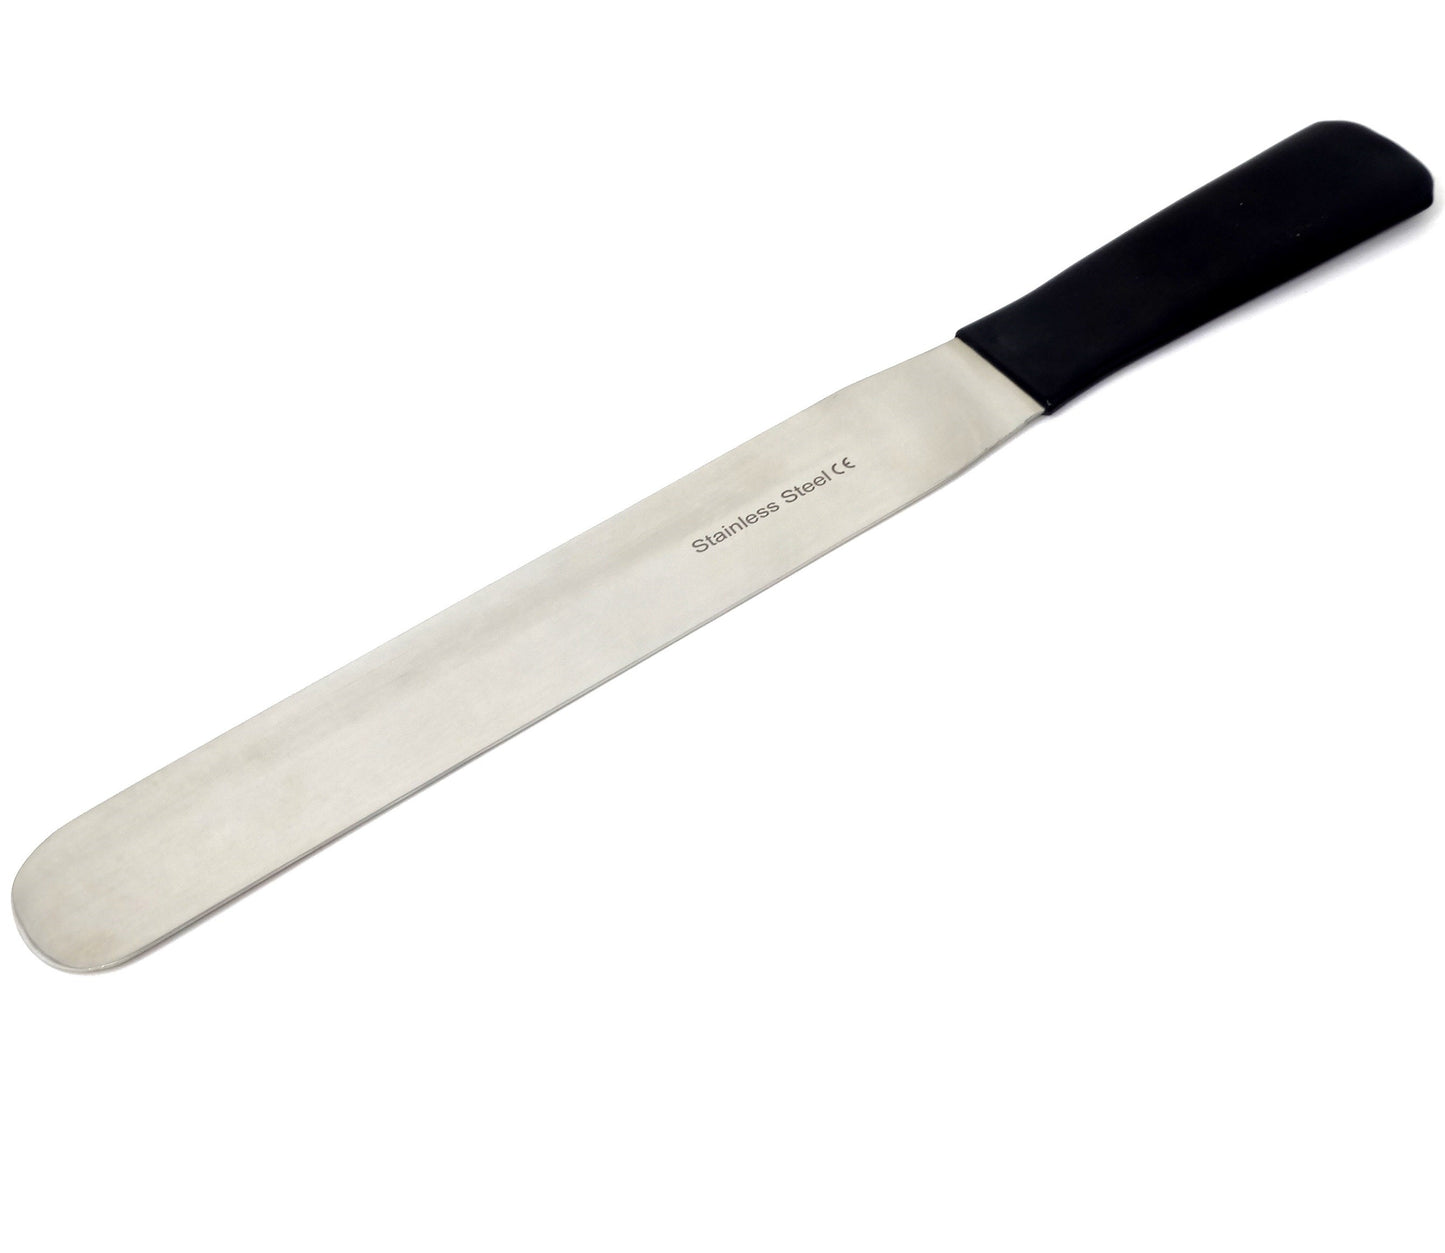 Stainless Steel Spatula Baker's Knife Mixing Spreading Tool, 12" Polished Blade, Vinyl Comfort Grip